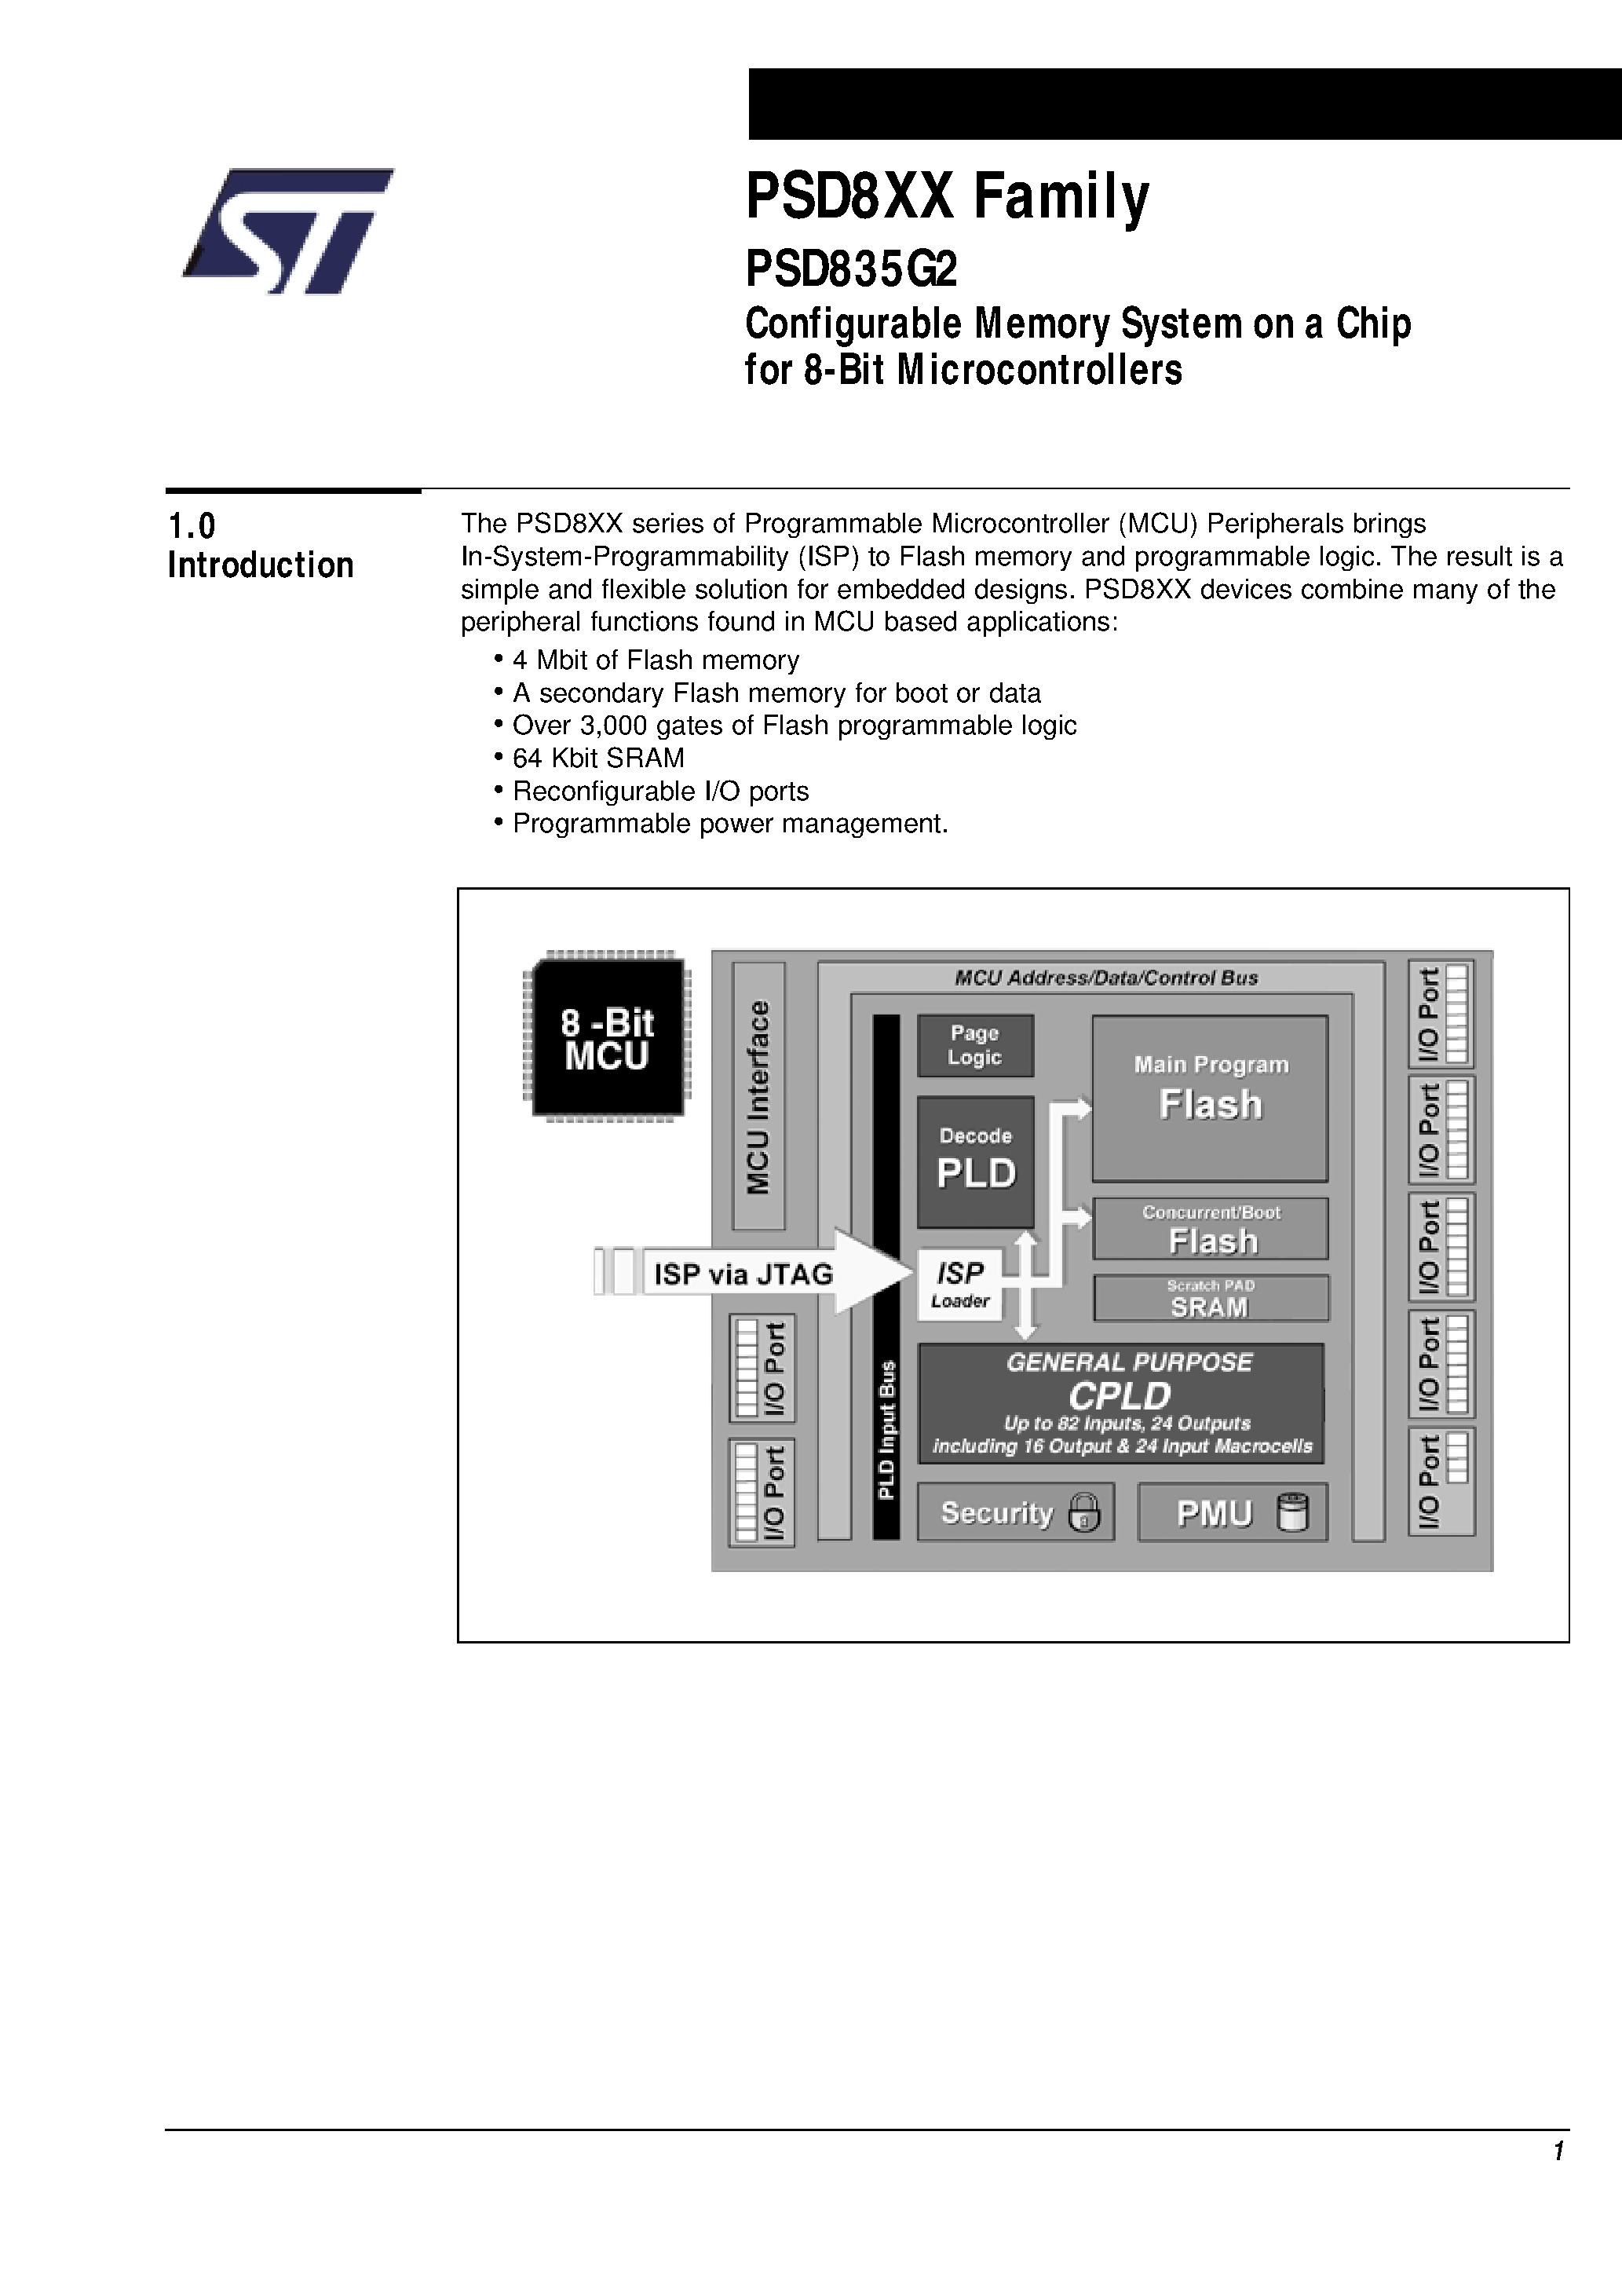 Datasheet PSD835F1-A-90UI - Configurable Memory System on a Chip for 8-Bit Microcontrollers page 2